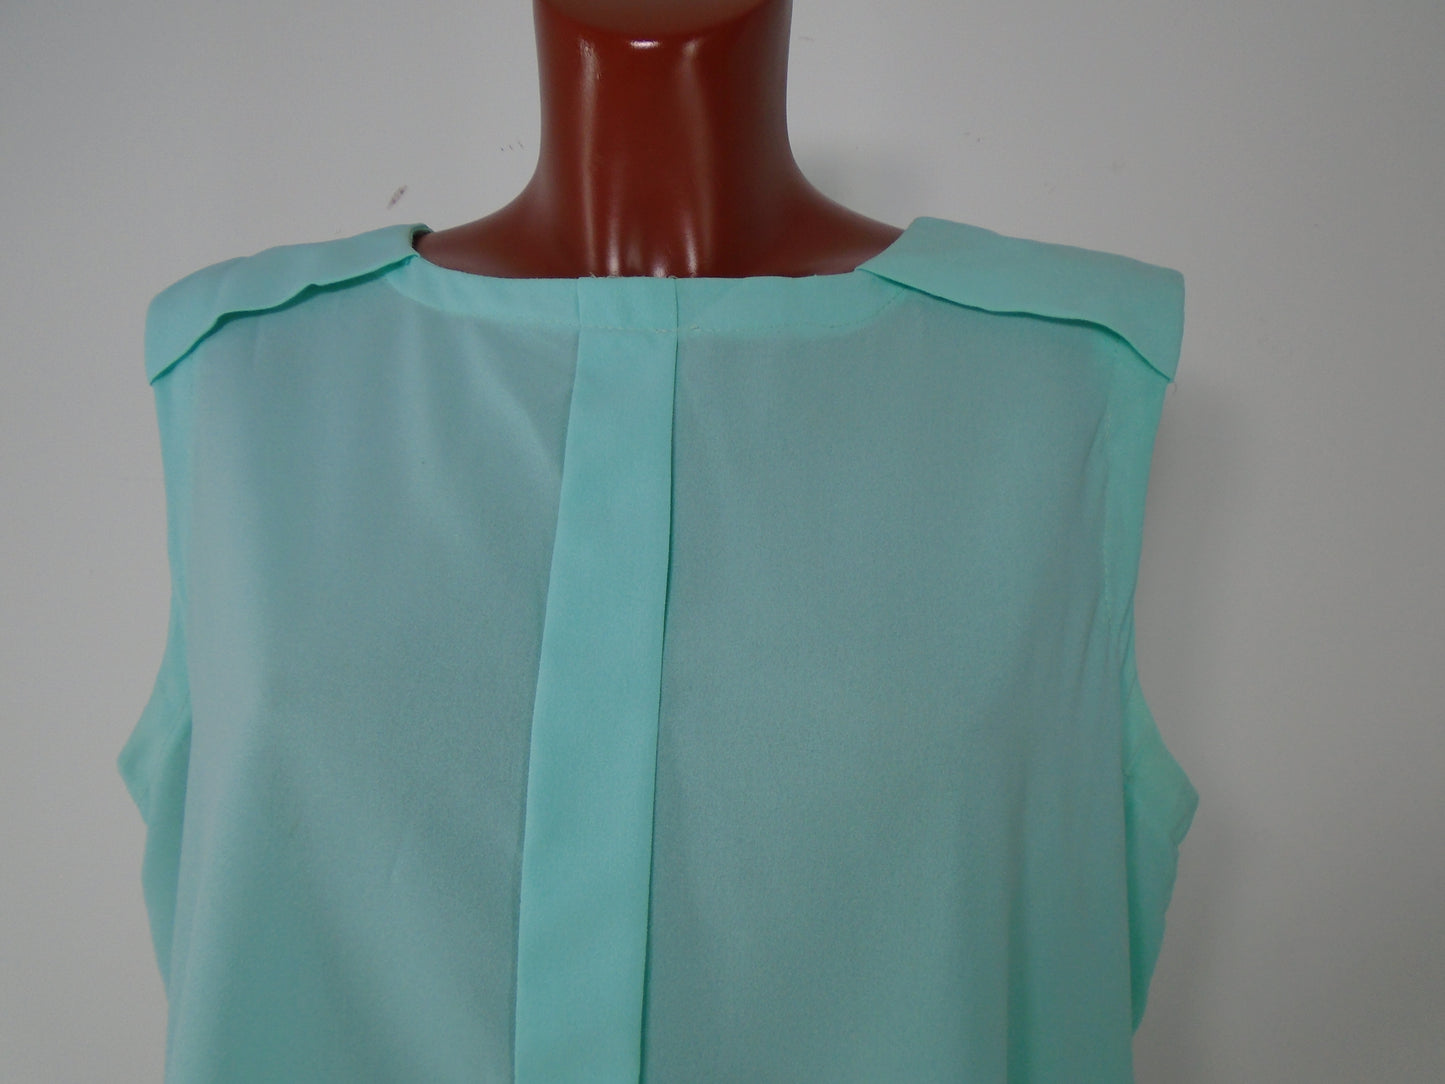 Women's Blouse D Cero. Blue. L. Used. Very good condition